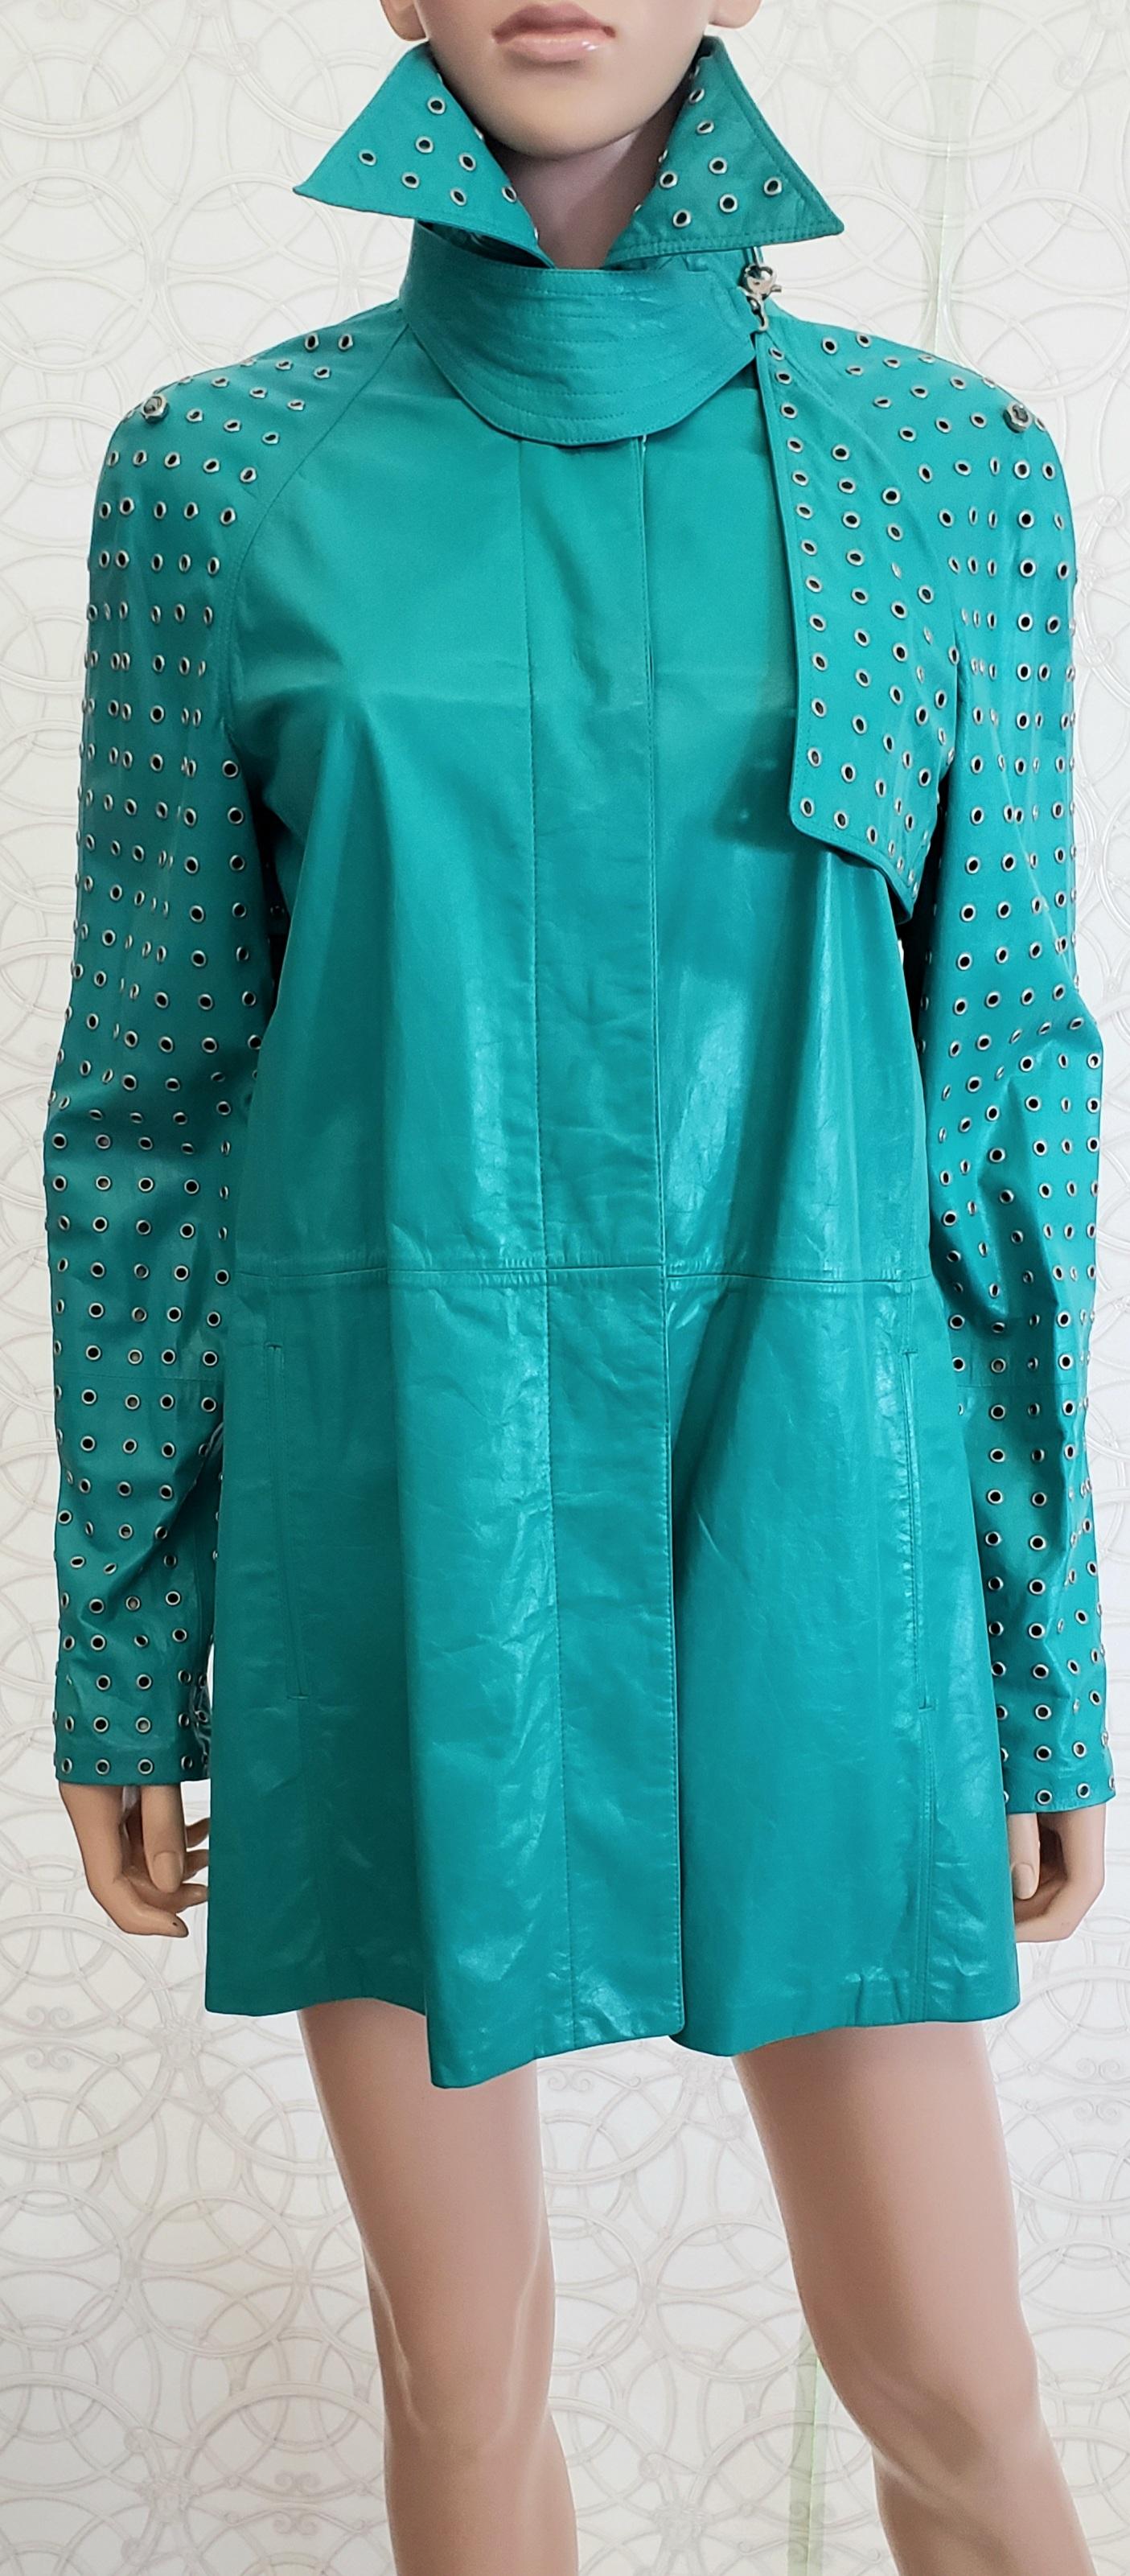 NEW GIANNI VERSACE EMERALD GREEN LEATHER JACKET with RIVETS Sz IT 40 - US 4/6 For Sale 5